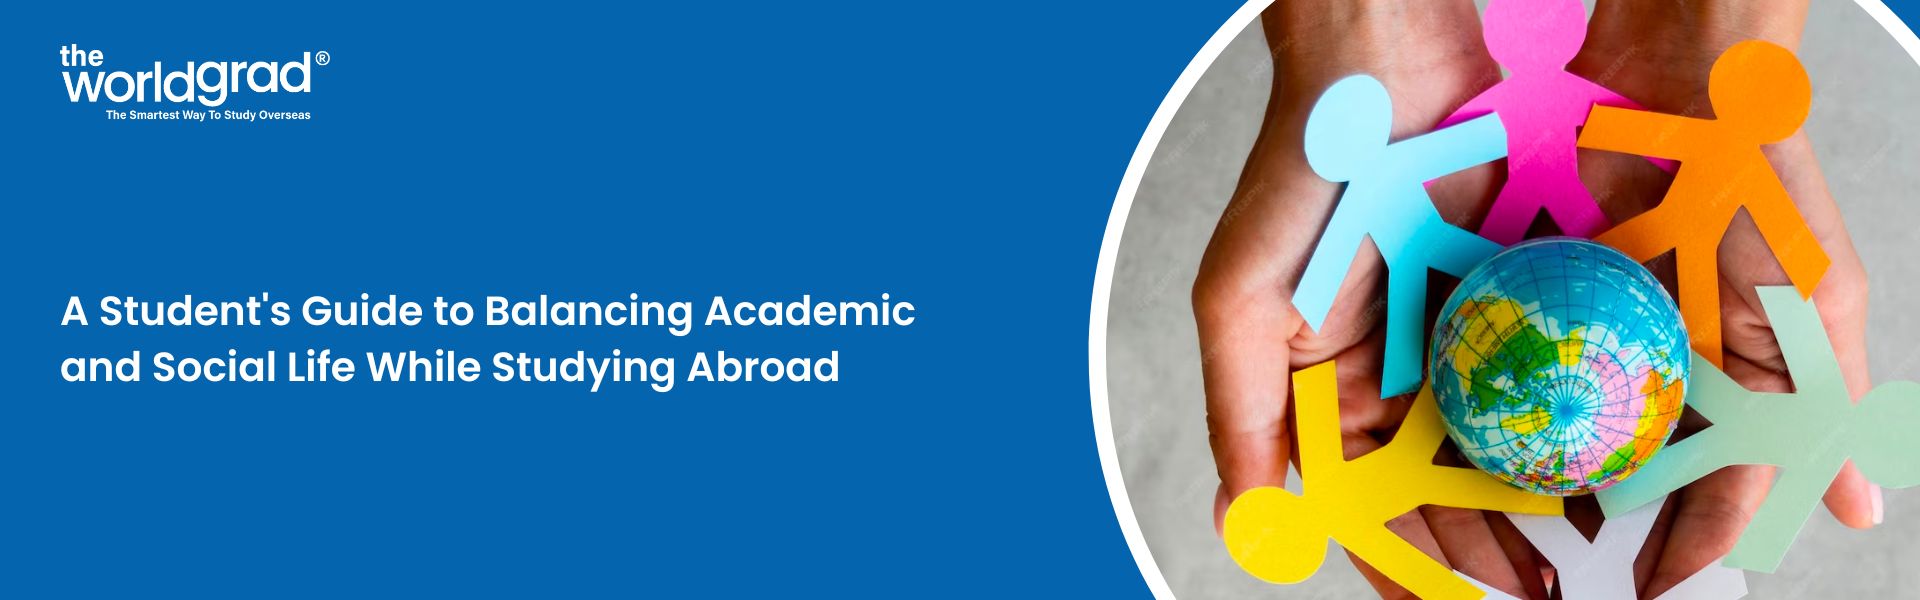 A Student’s Guide to Balancing Academic and Social Life While Studying Abroad